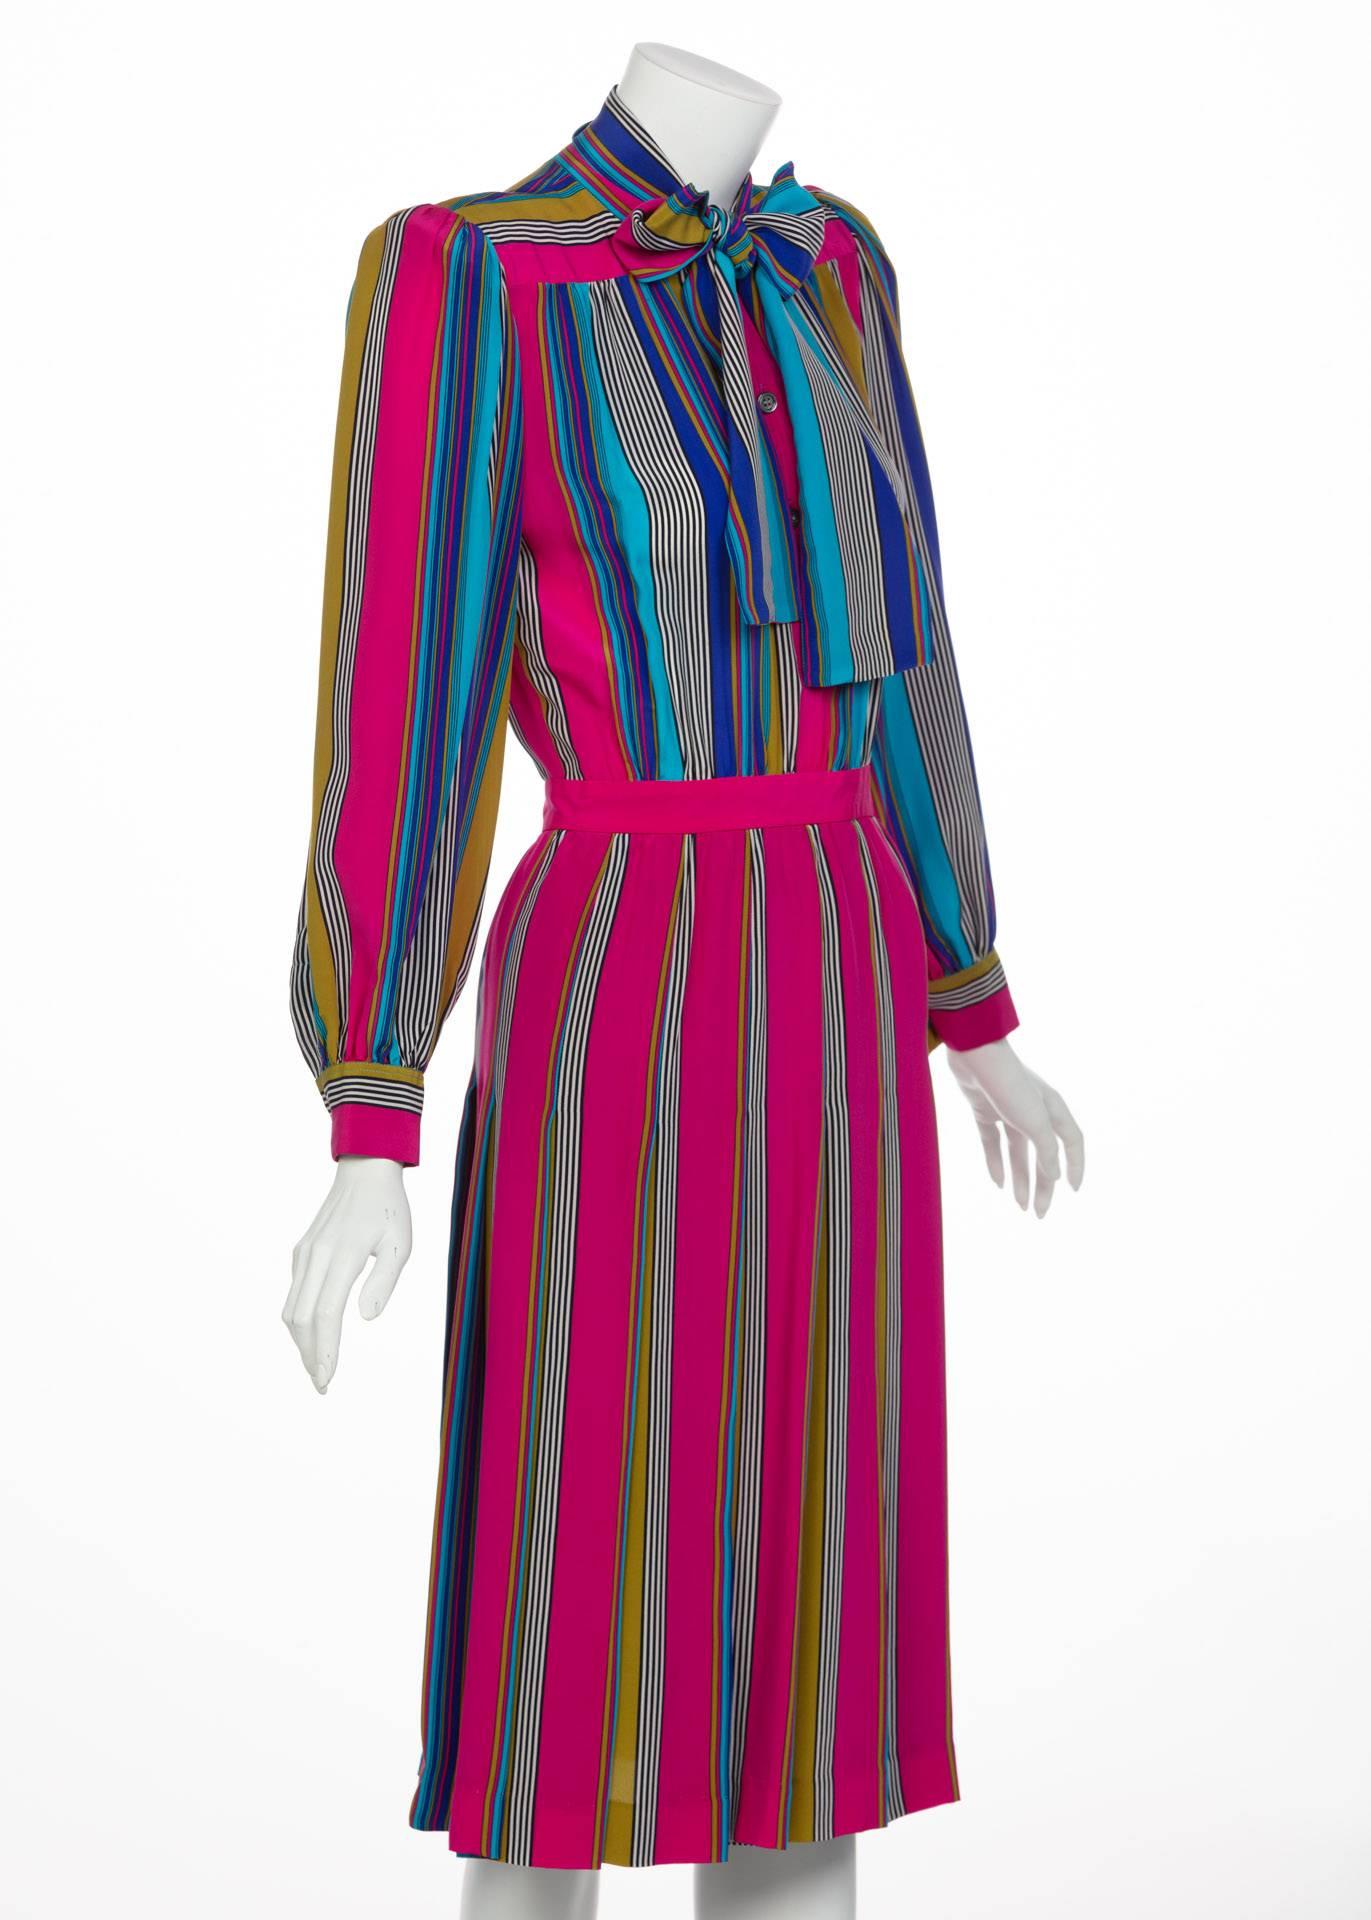 1982 Yves Saint Laurent Multicolored Striped Silk Dress Documented YSL In Excellent Condition For Sale In Boca Raton, FL